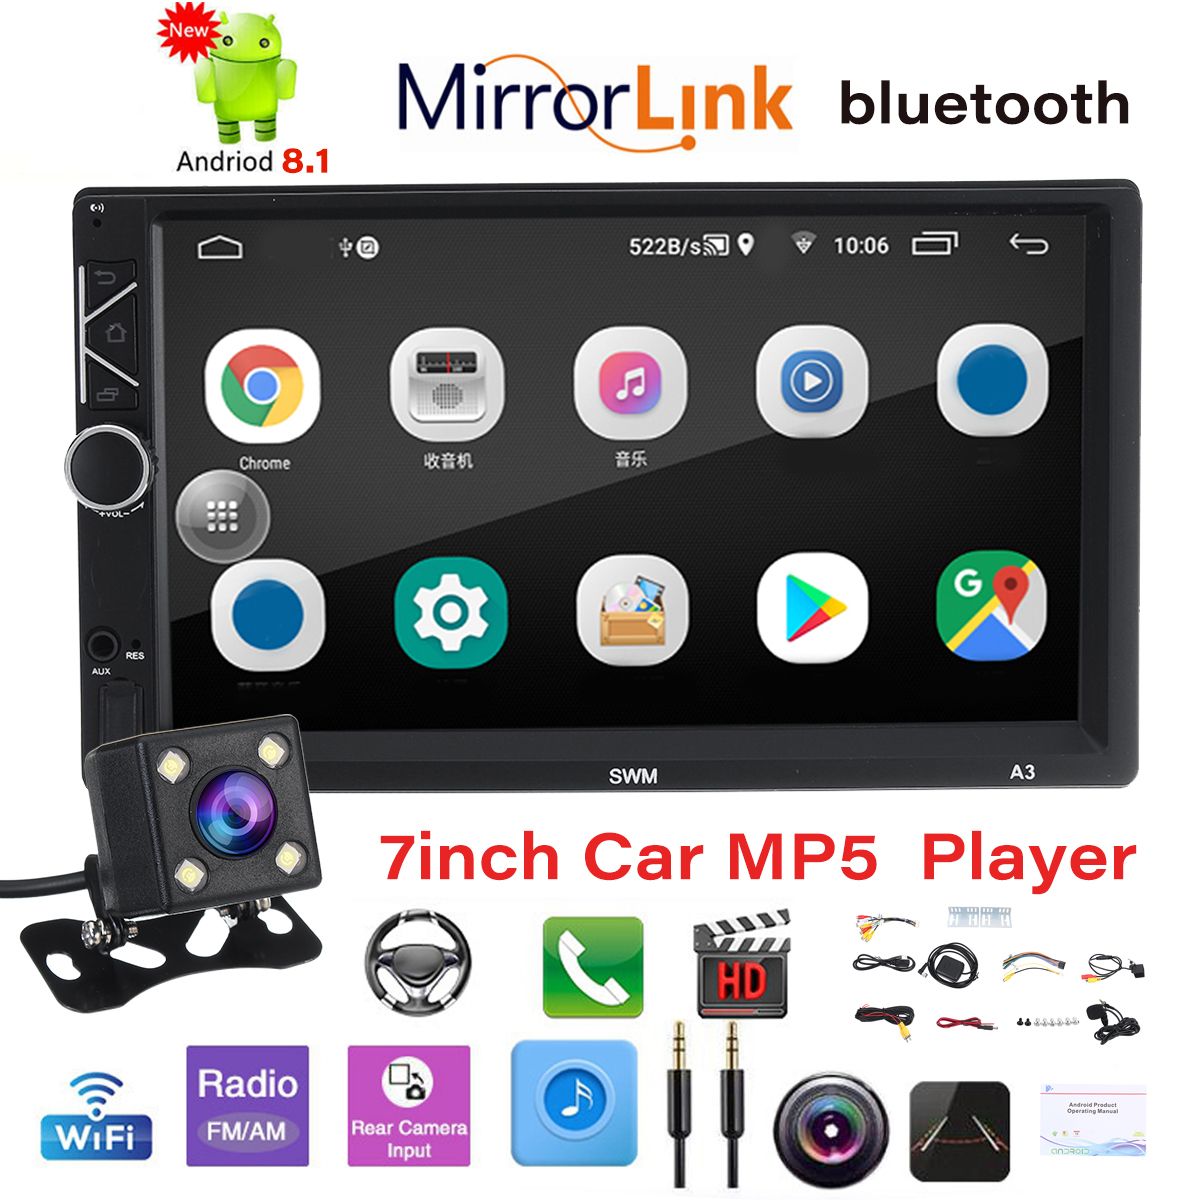 A3-7-Inch-2DIN-Android-81-Car-Stereo-Radio-MP5-Player-WiFi-GPS-FM-bluetooth-with-Backup-Camera-Exter-1720455